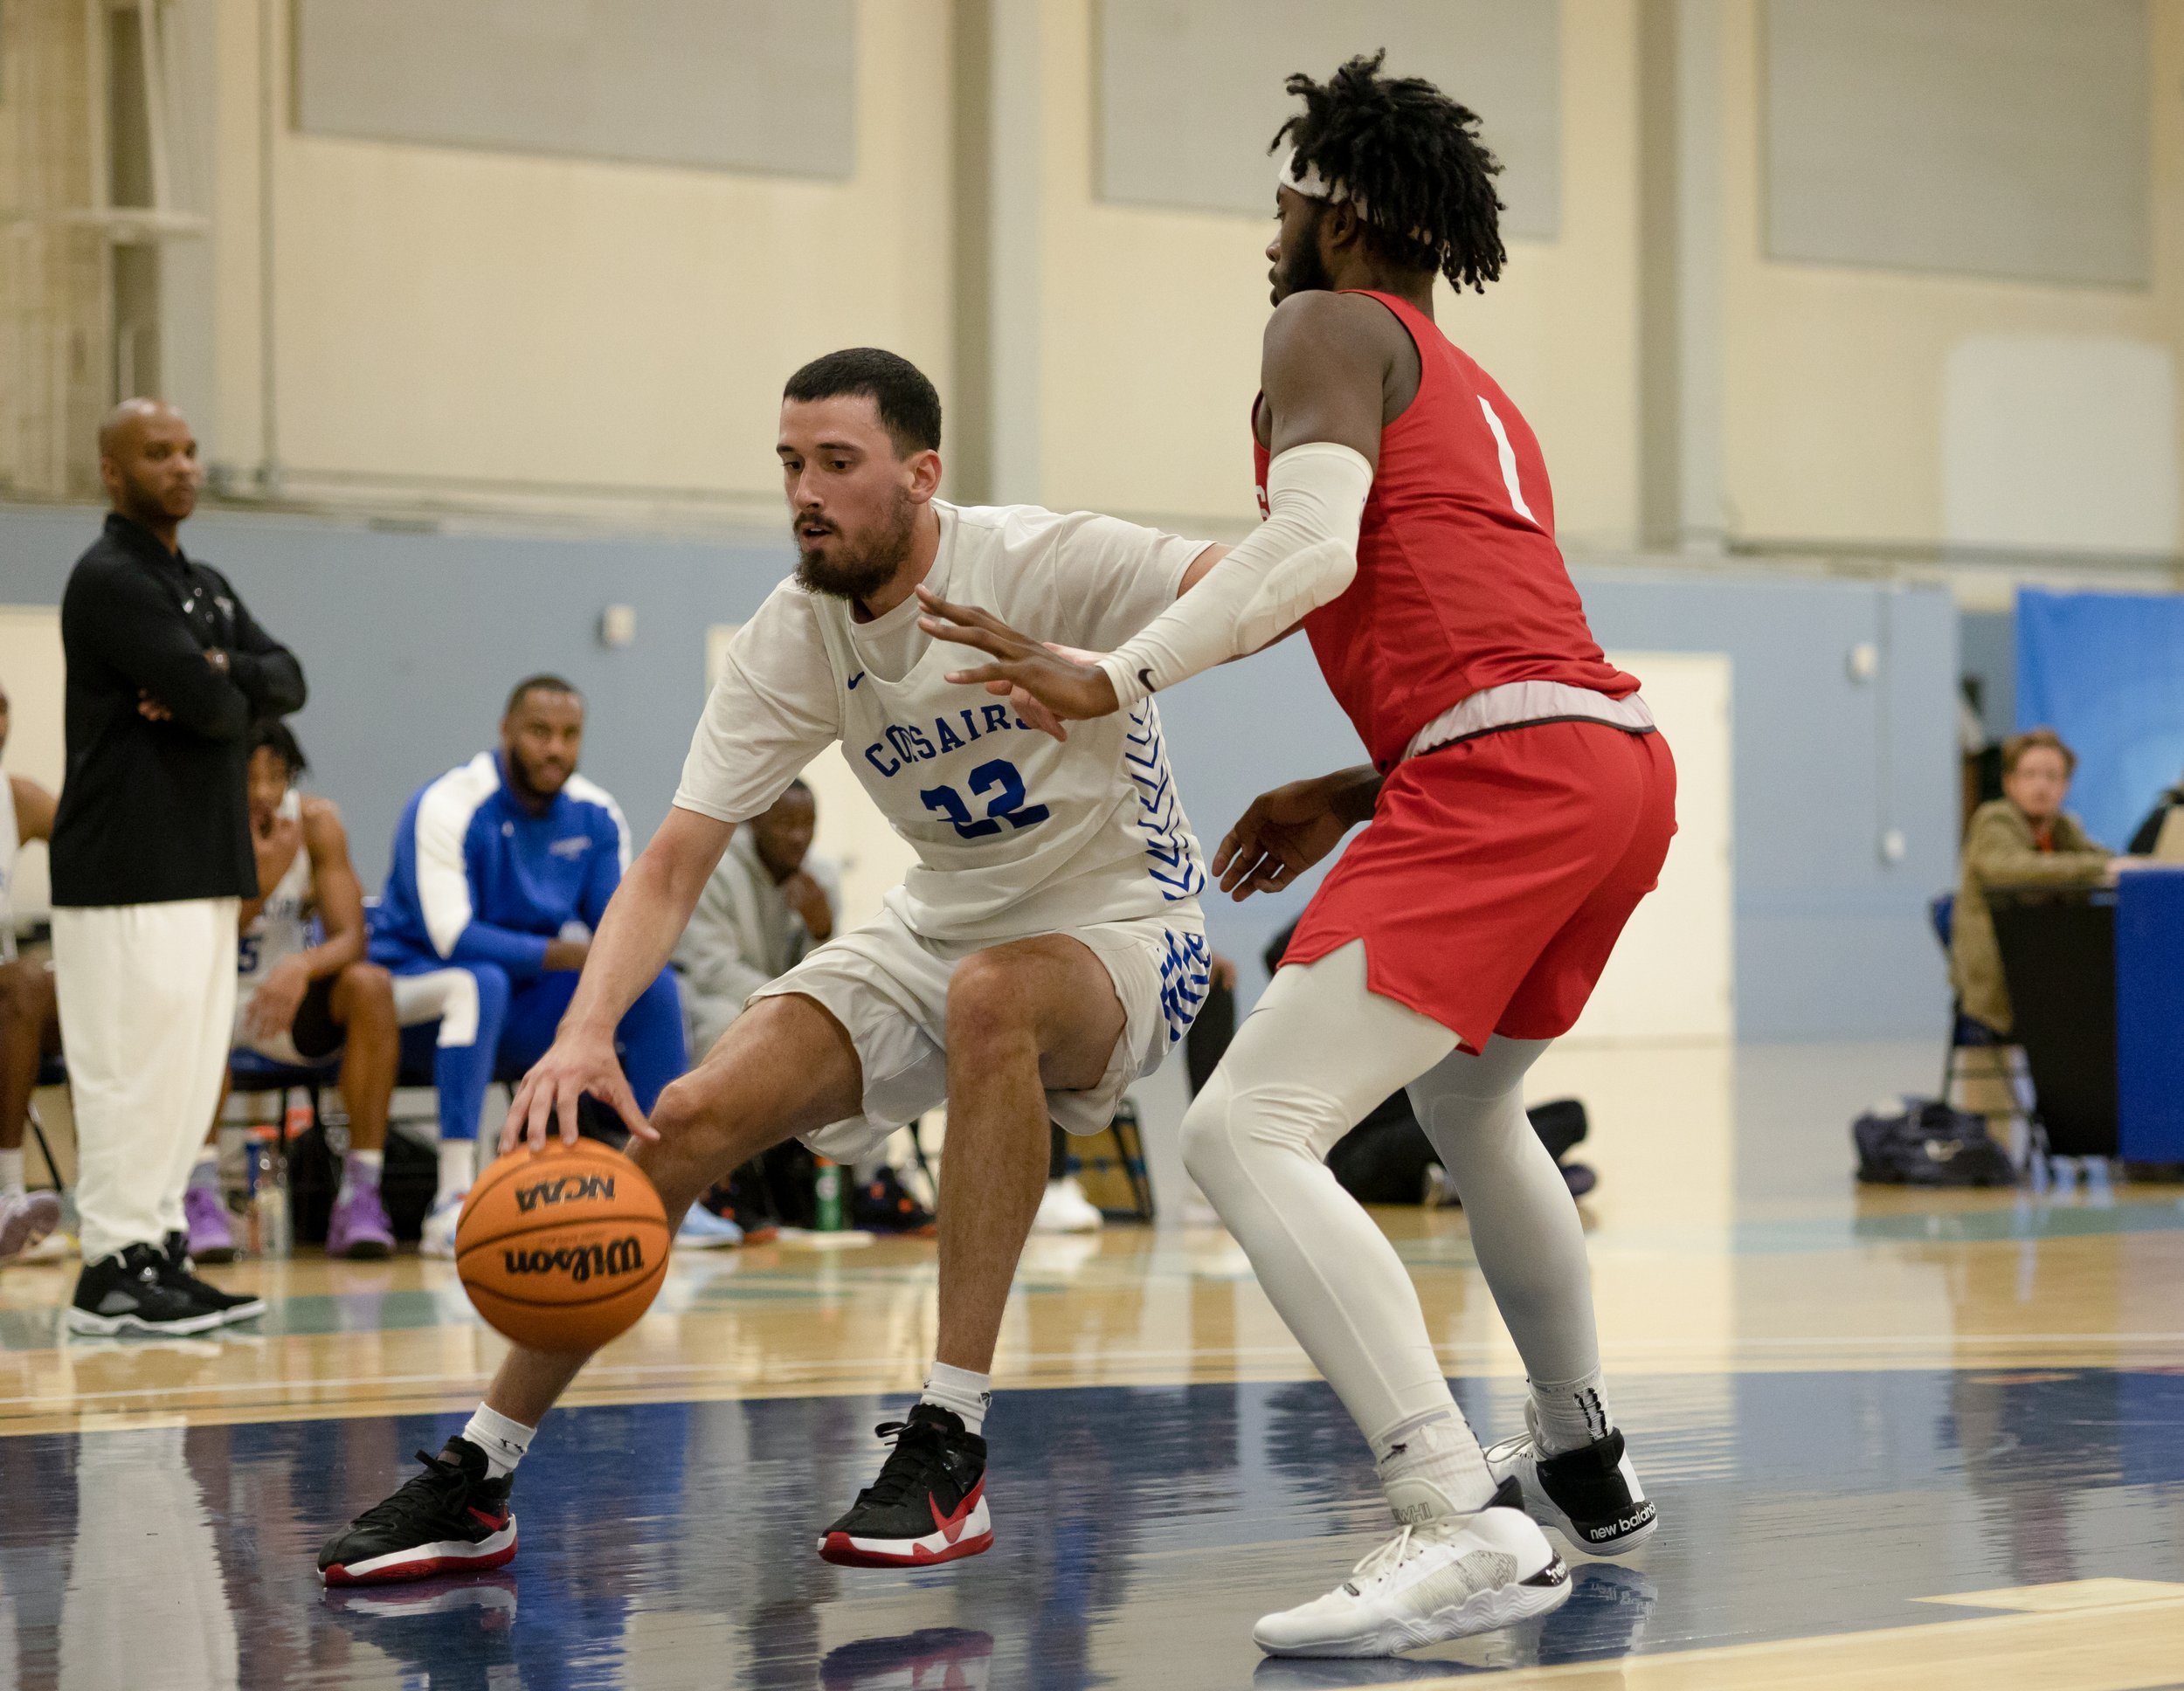  Corsairs center Quinn Collins (left) dribbling the ball while attempting to get around Knights forward Anthony Howell (right) so he can make the shot. November 5, 2022, Santa Monica, Calif. (Jamie Addison | The Corsair) 